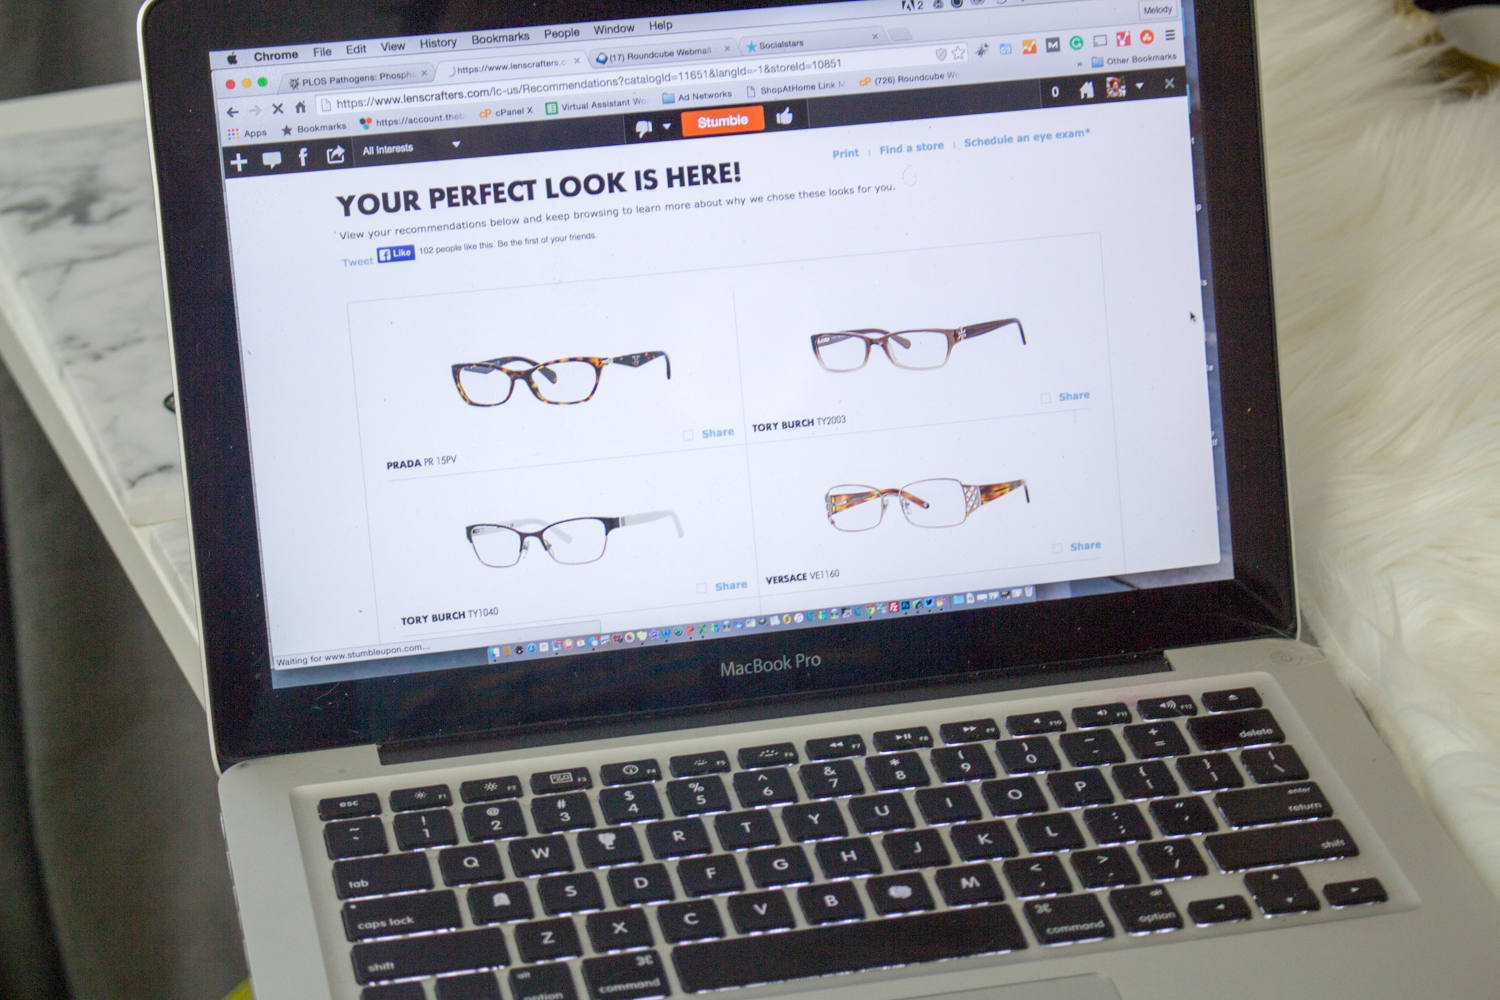 LensCrafters is the place to find the perfect look when it comes to eyewear.  #lenscrafterscrowd